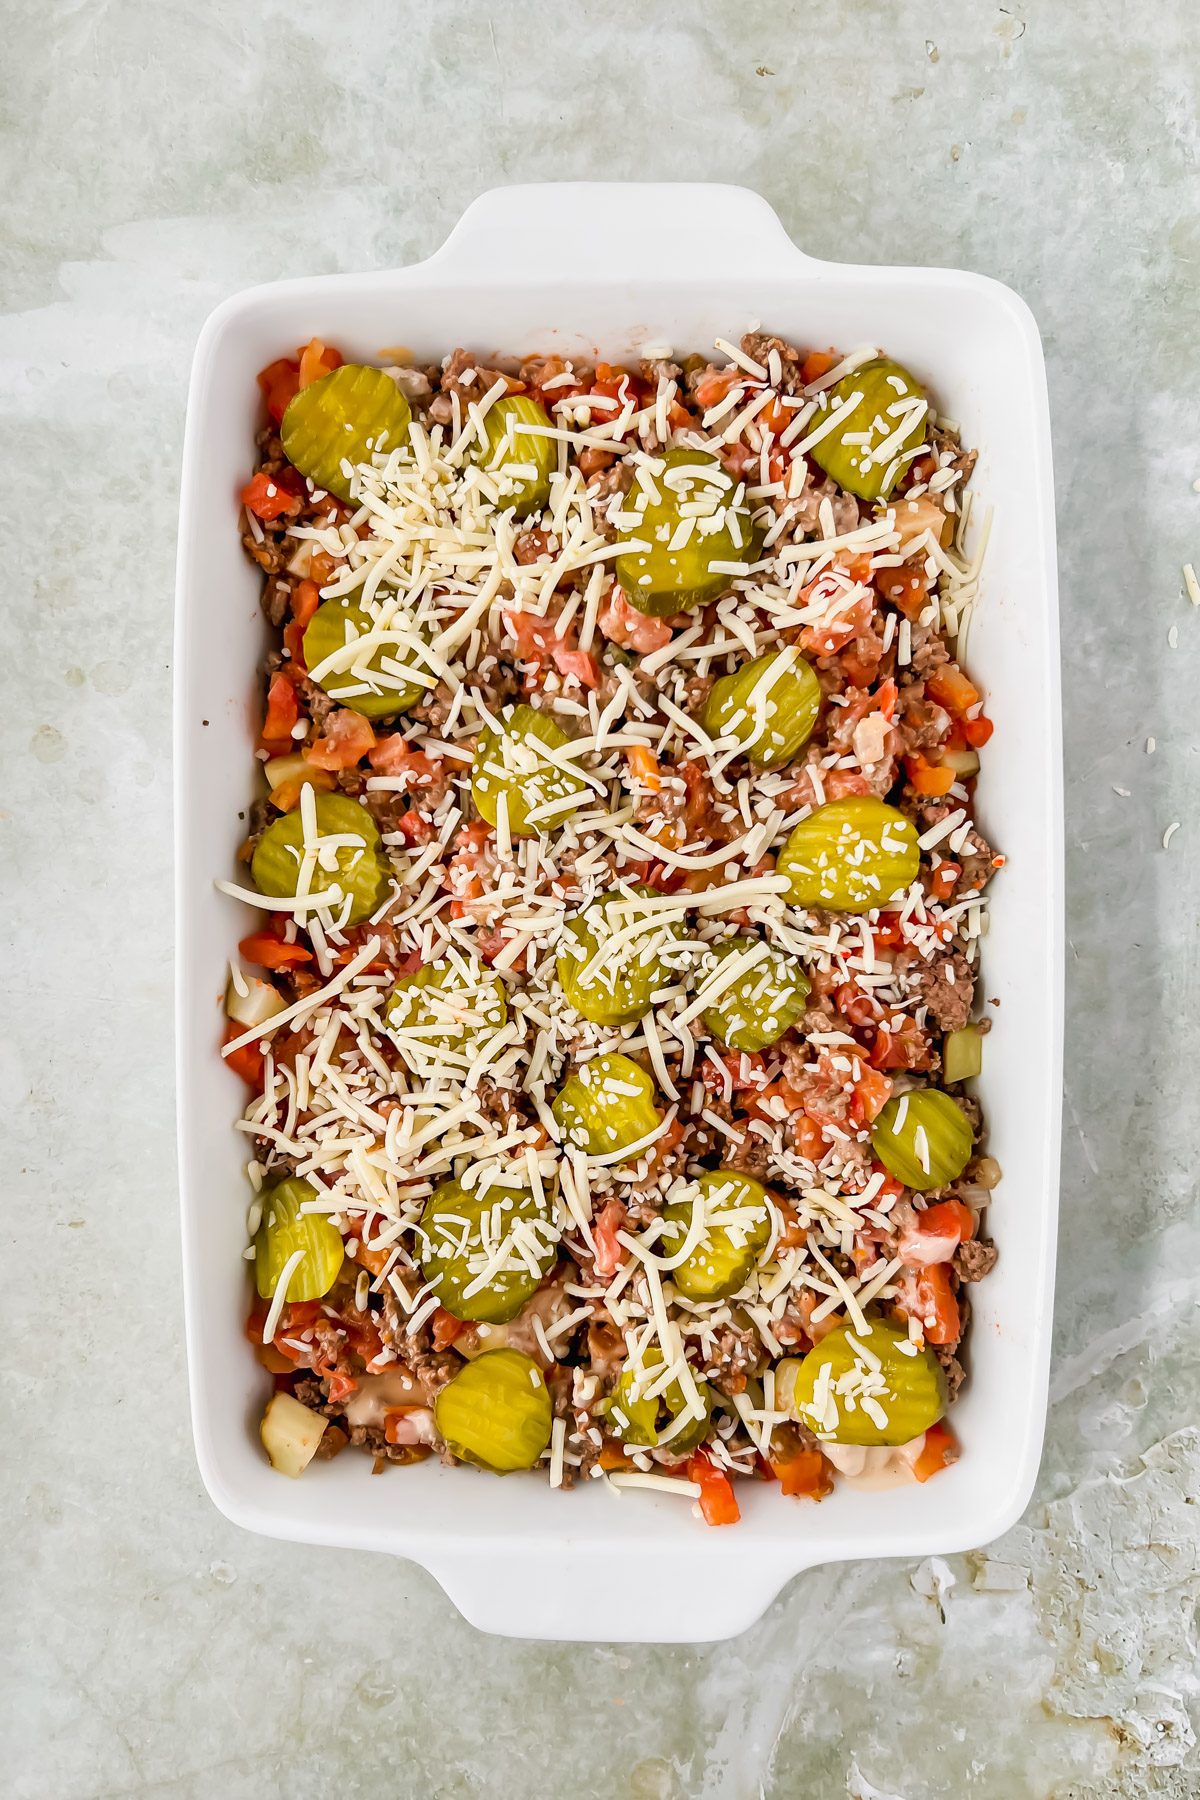 big mac casserole drizzled with fry sauce and topped with pickles and cheese prior to baking.